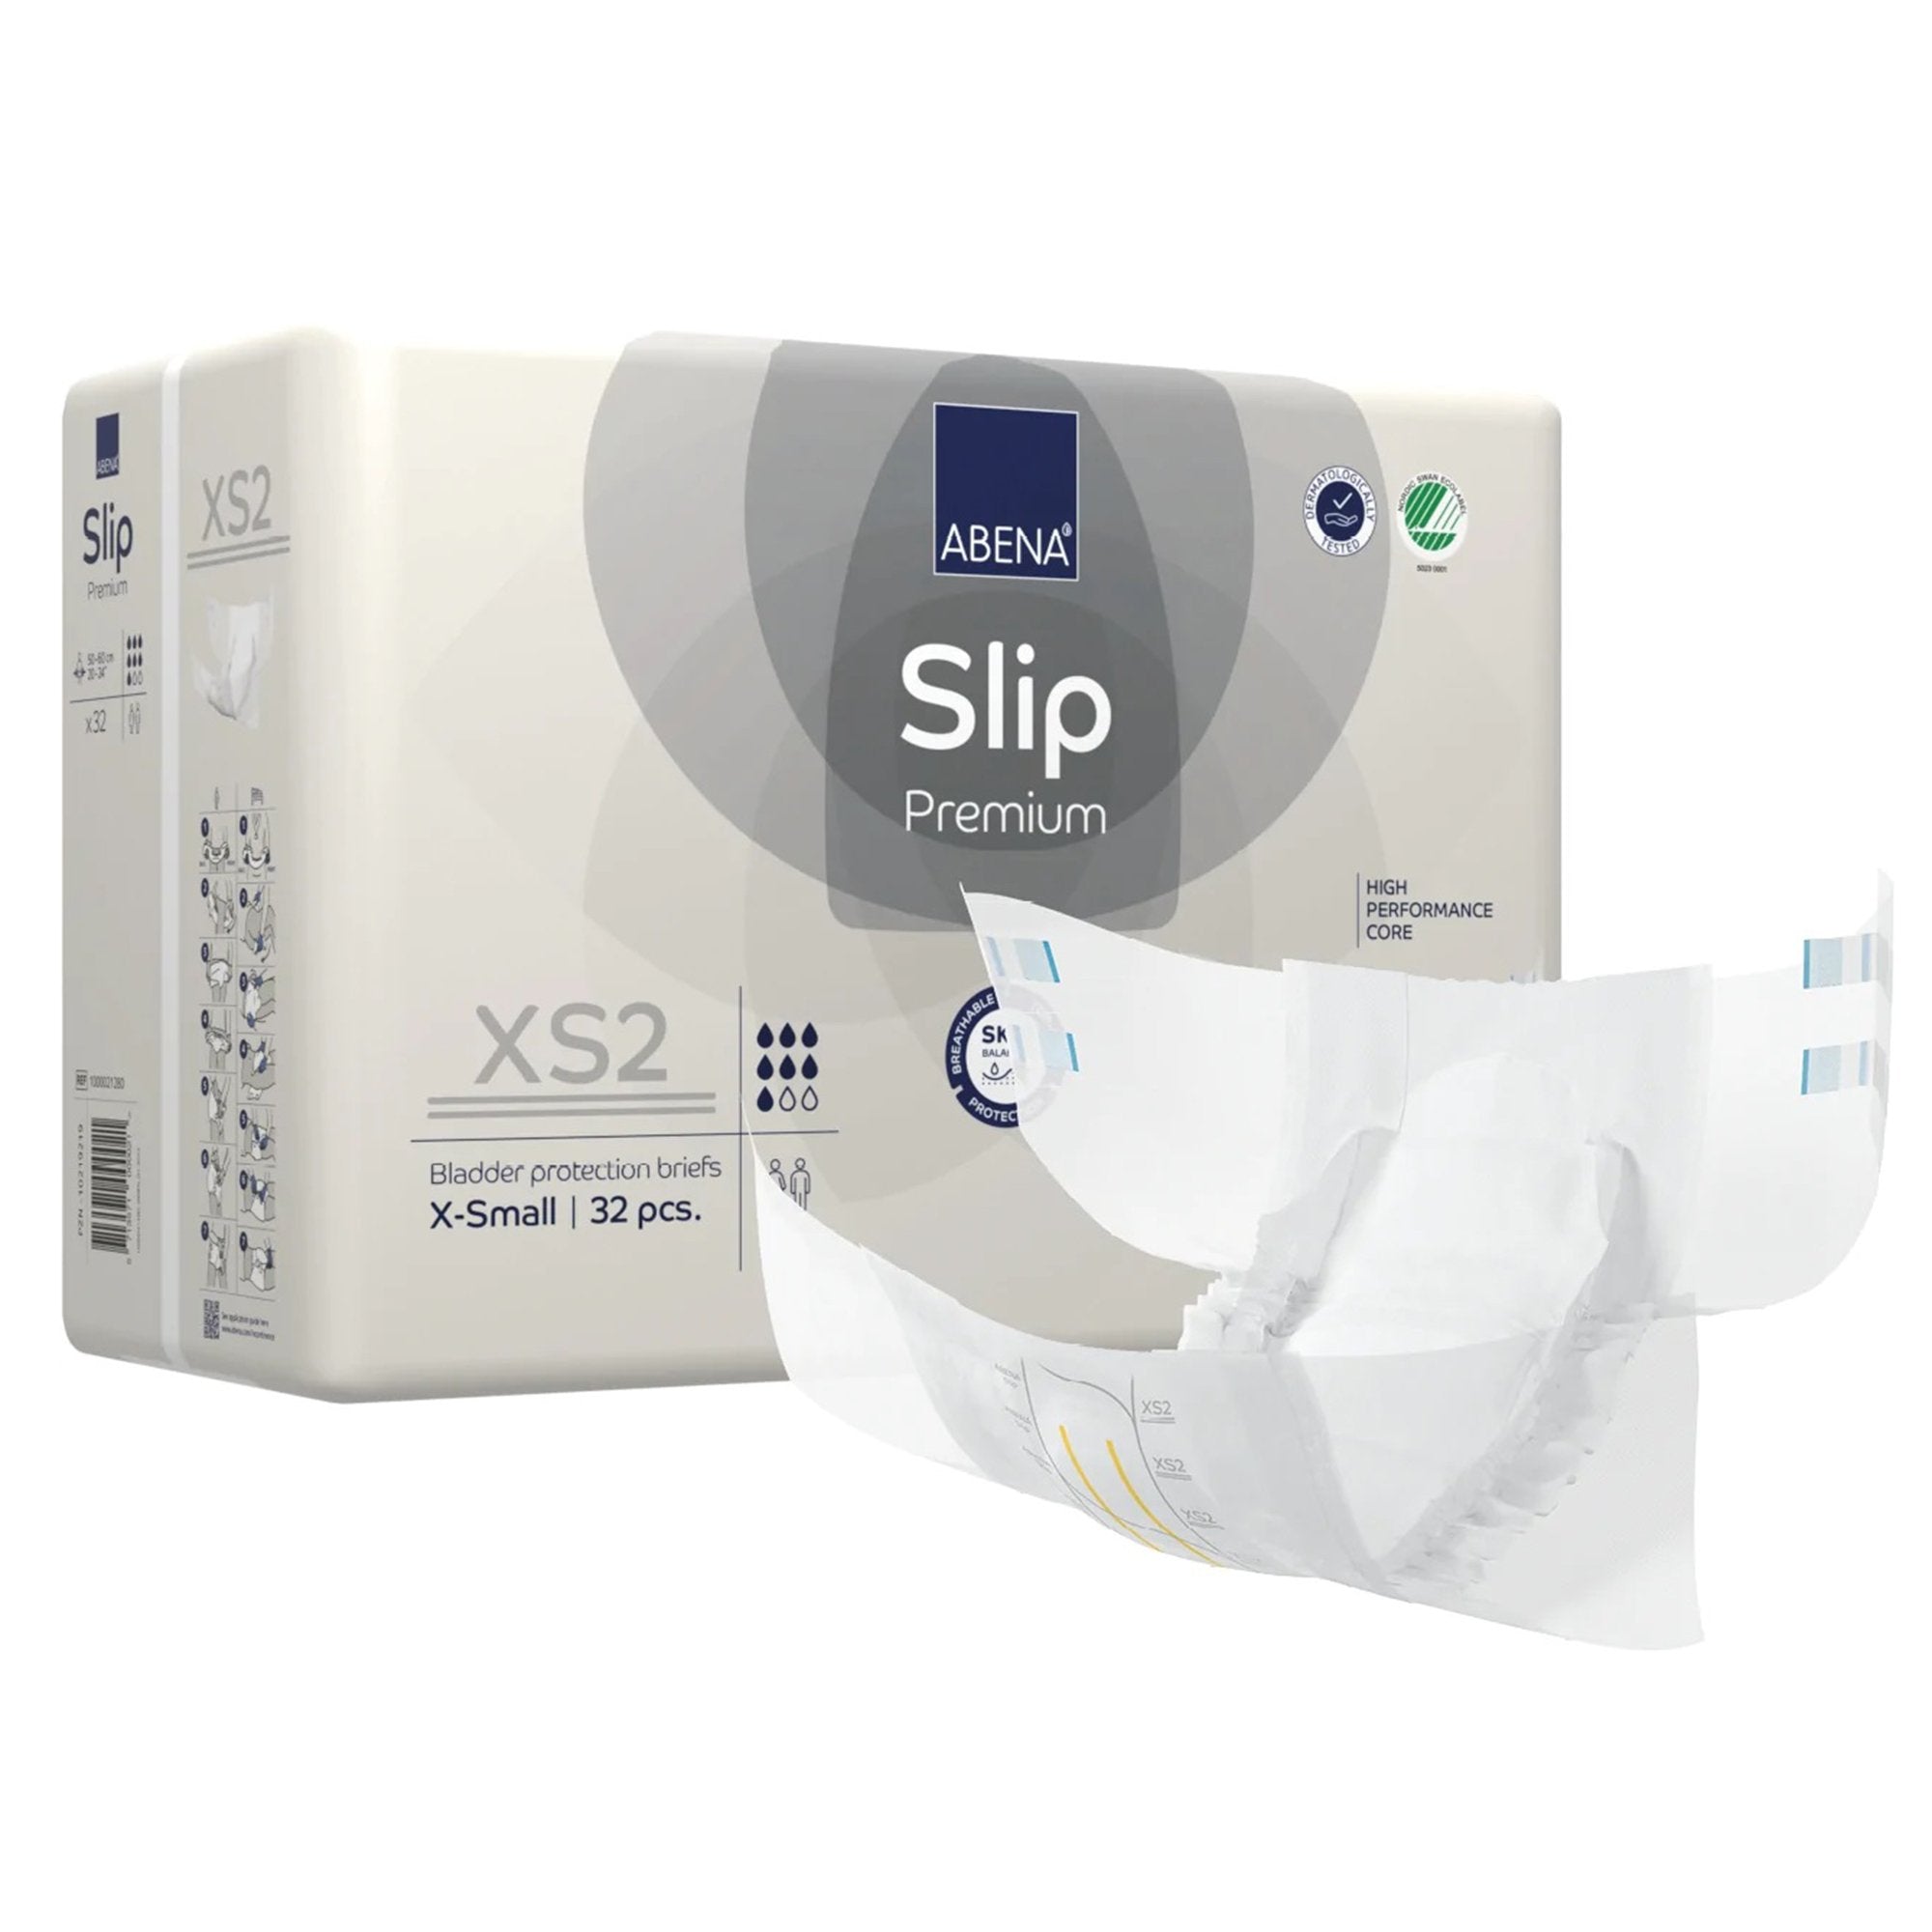 Unisex Adult Incontinence Brief Abena® Slip Premium XS2 X-Small Disposable Heavy Absorbency